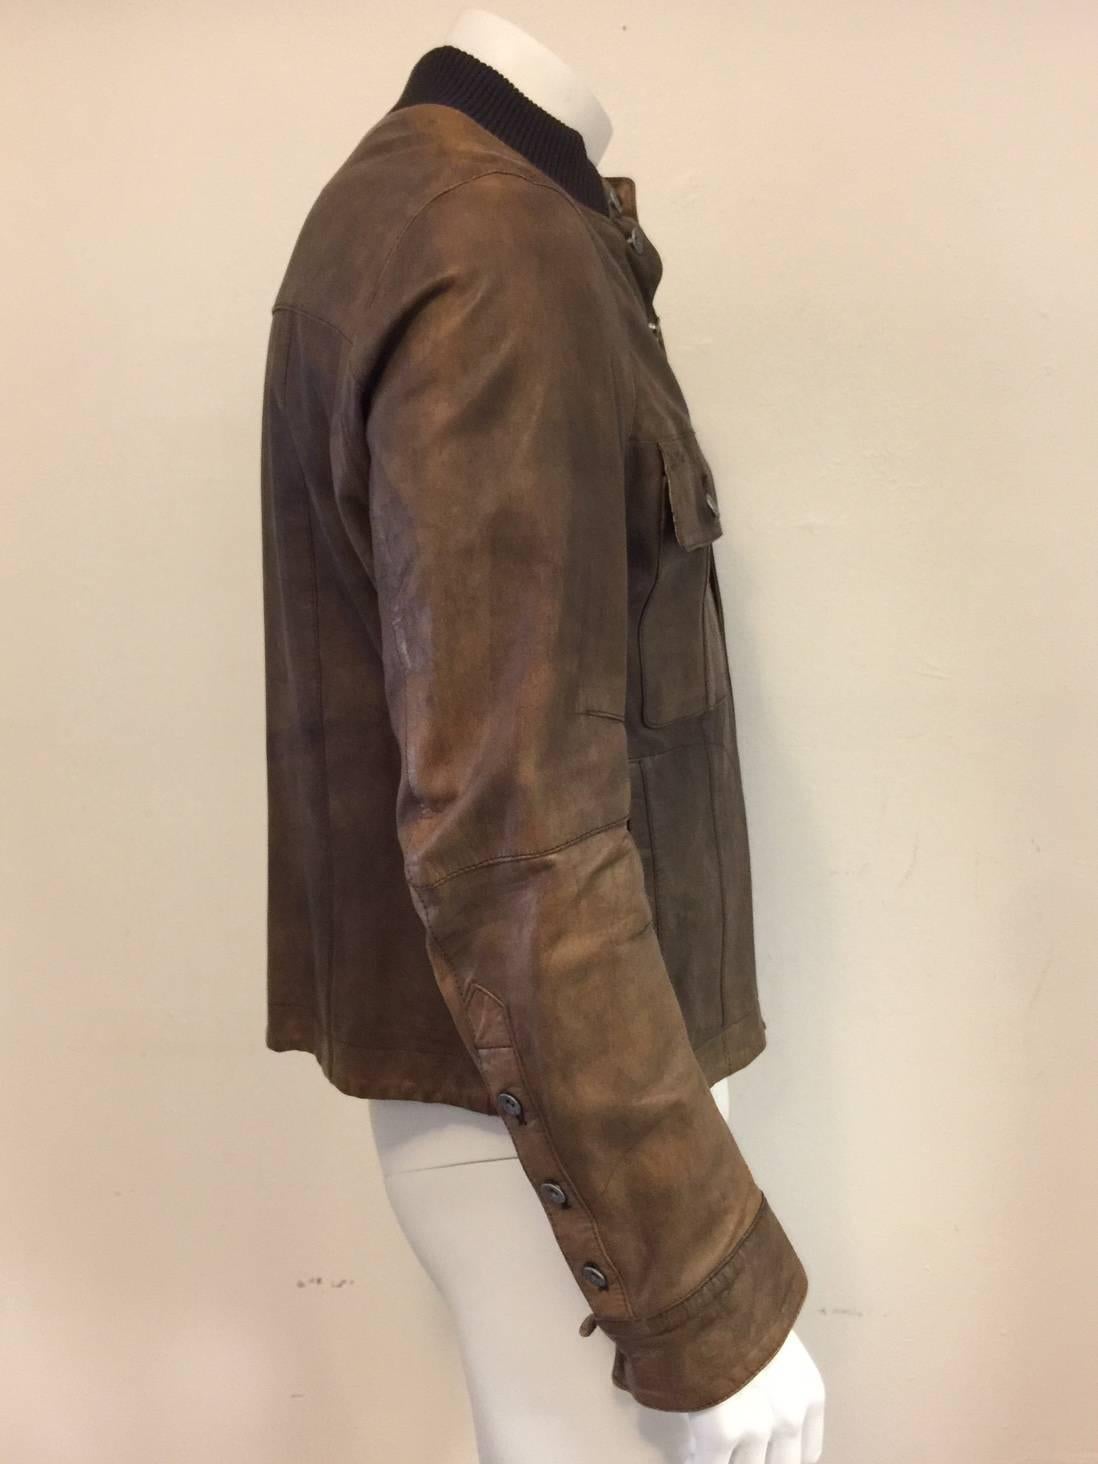 Cool D & G jacket in soft  shades of burnished tobacco leather.  Welted hem and cuffs, two side pockets, with a perforated fabric lining  for extra cool!  The buttons are iconicaly marked with D & G around the rim.